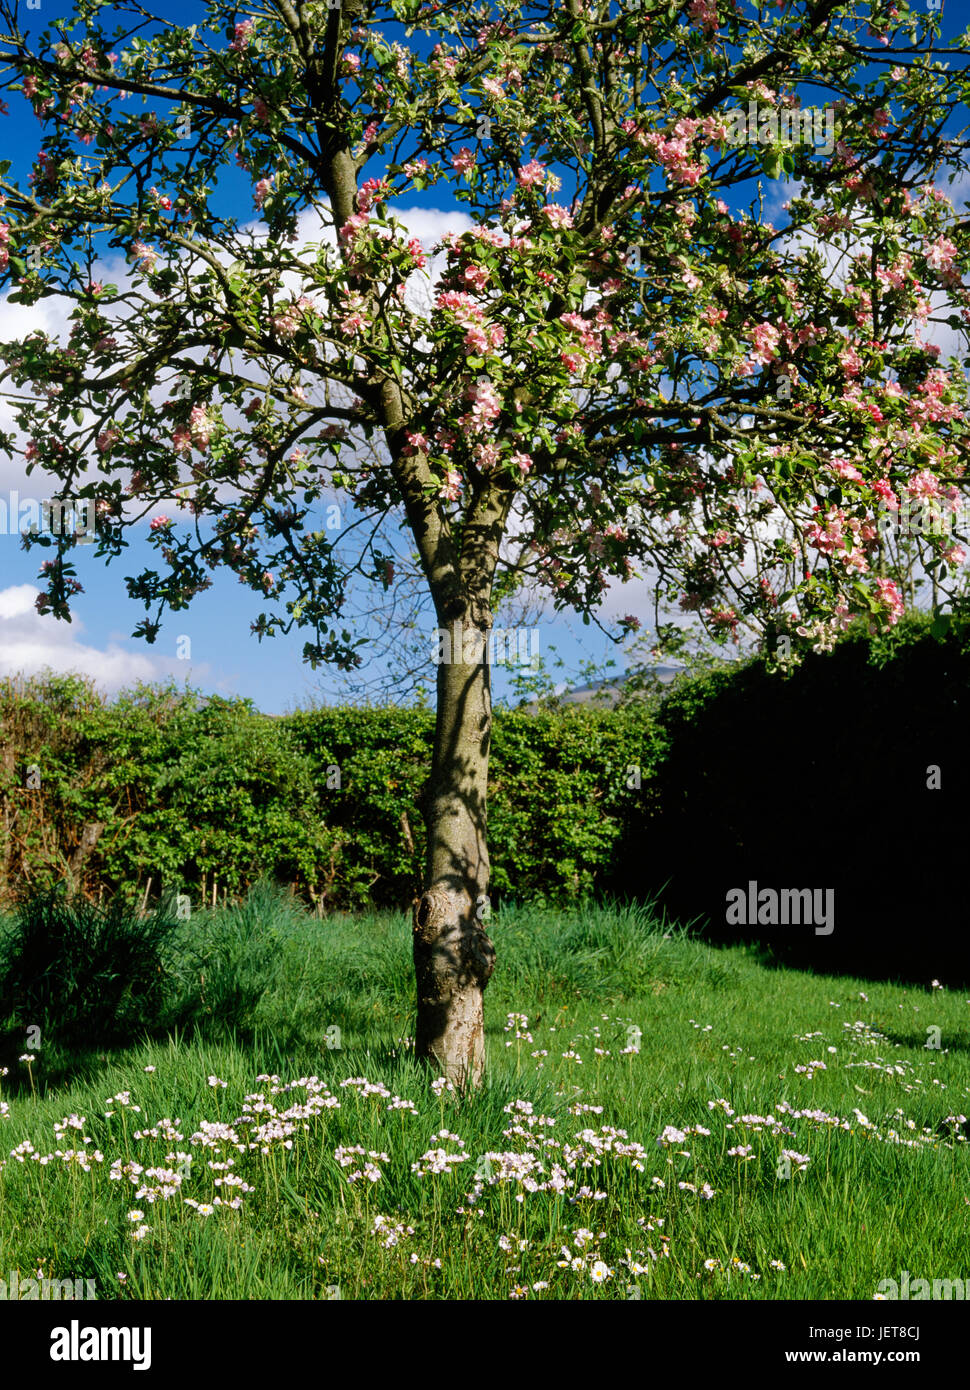 Grenadier cooking apple tree in blossom in May in a garden near Caernarfon, North Wales. Lady's-smock (cuckooflower) flowering in grass beneath tree. Stock Photo